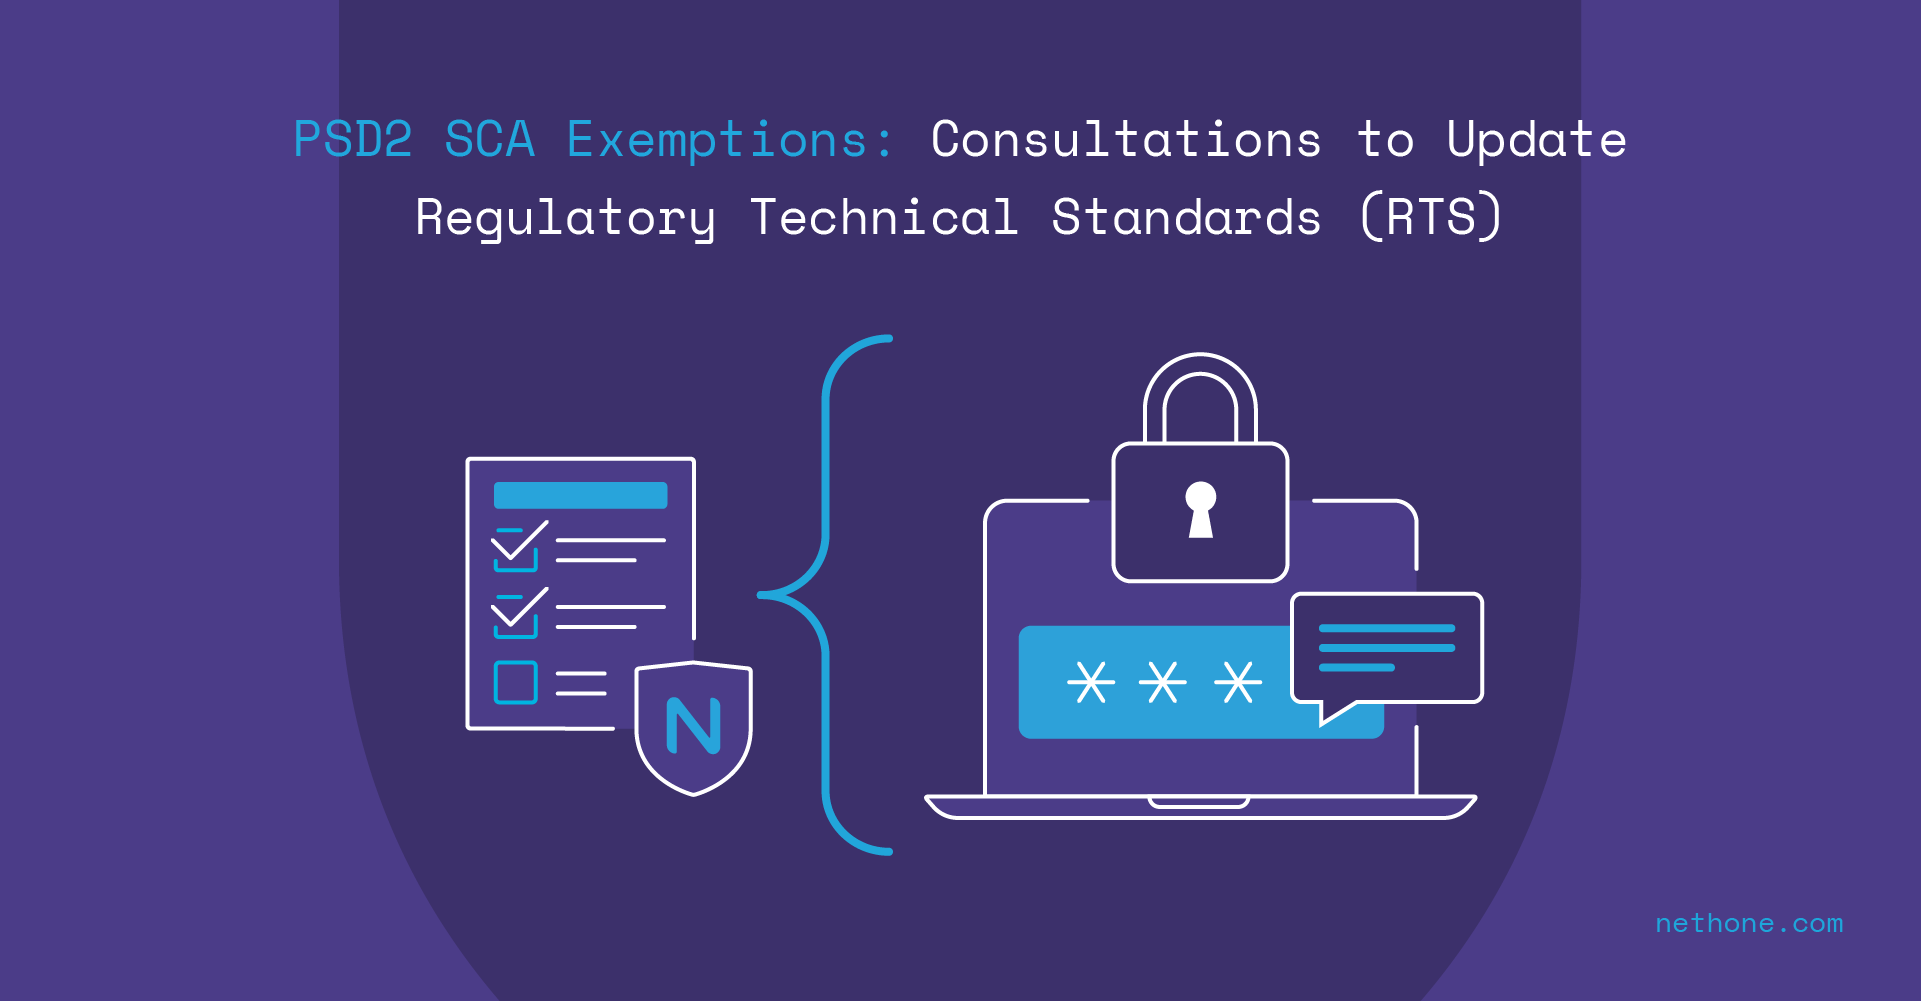 PSD2 SCA Exemptions: Update to Regulatory Technical Standards (RTS)